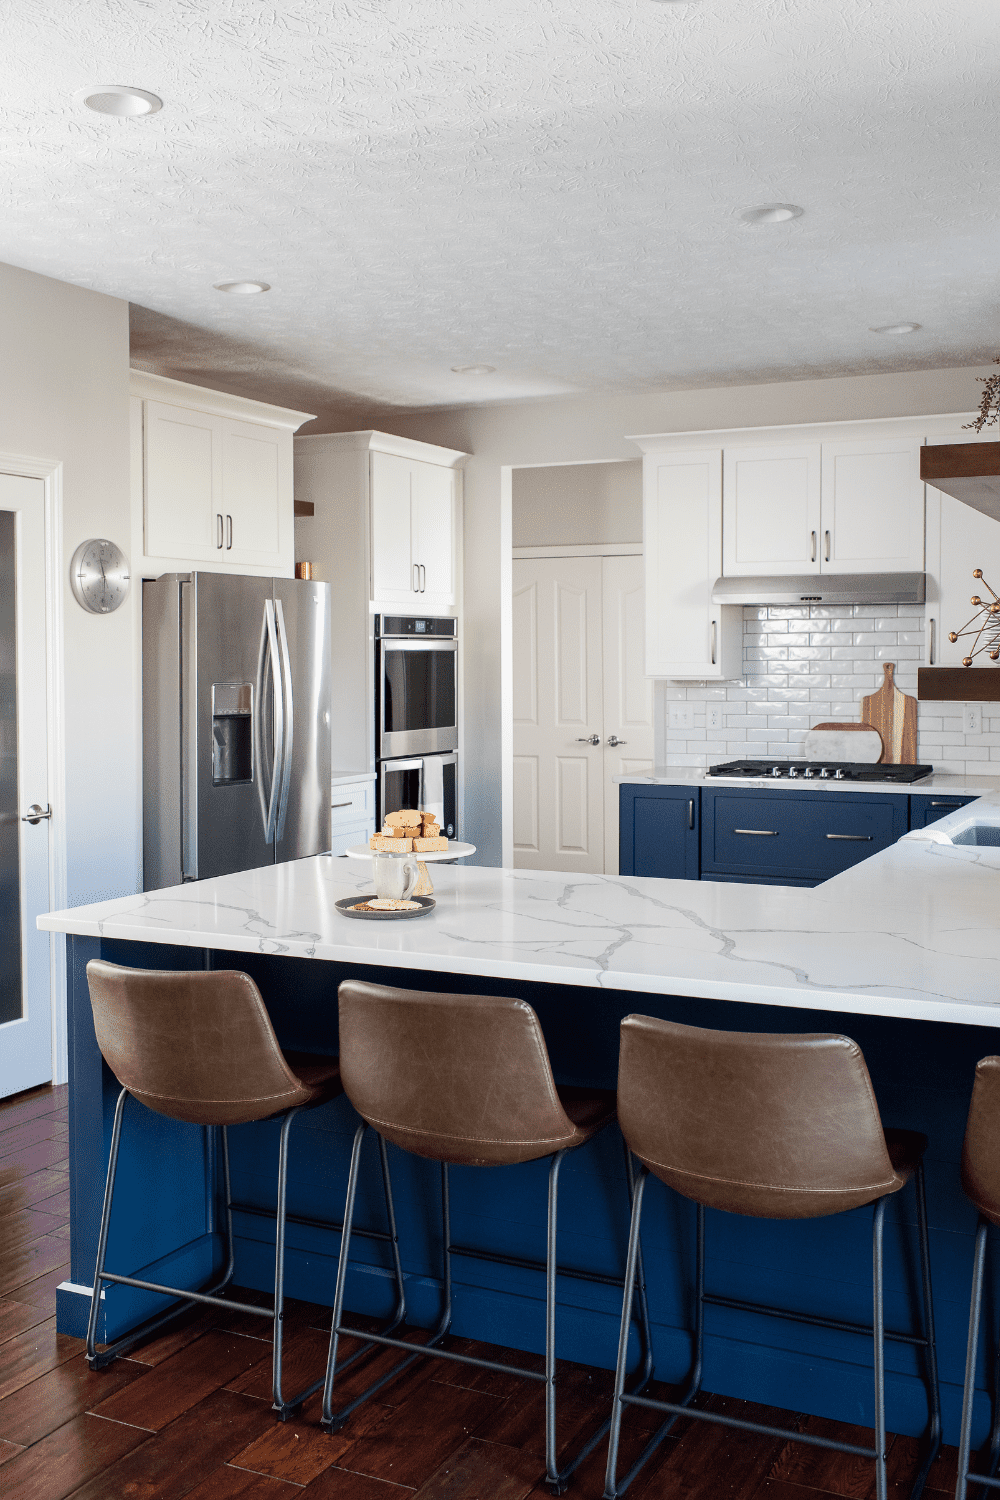 Nicholas Design Build | A kitchen with blue cabinets and a center island.